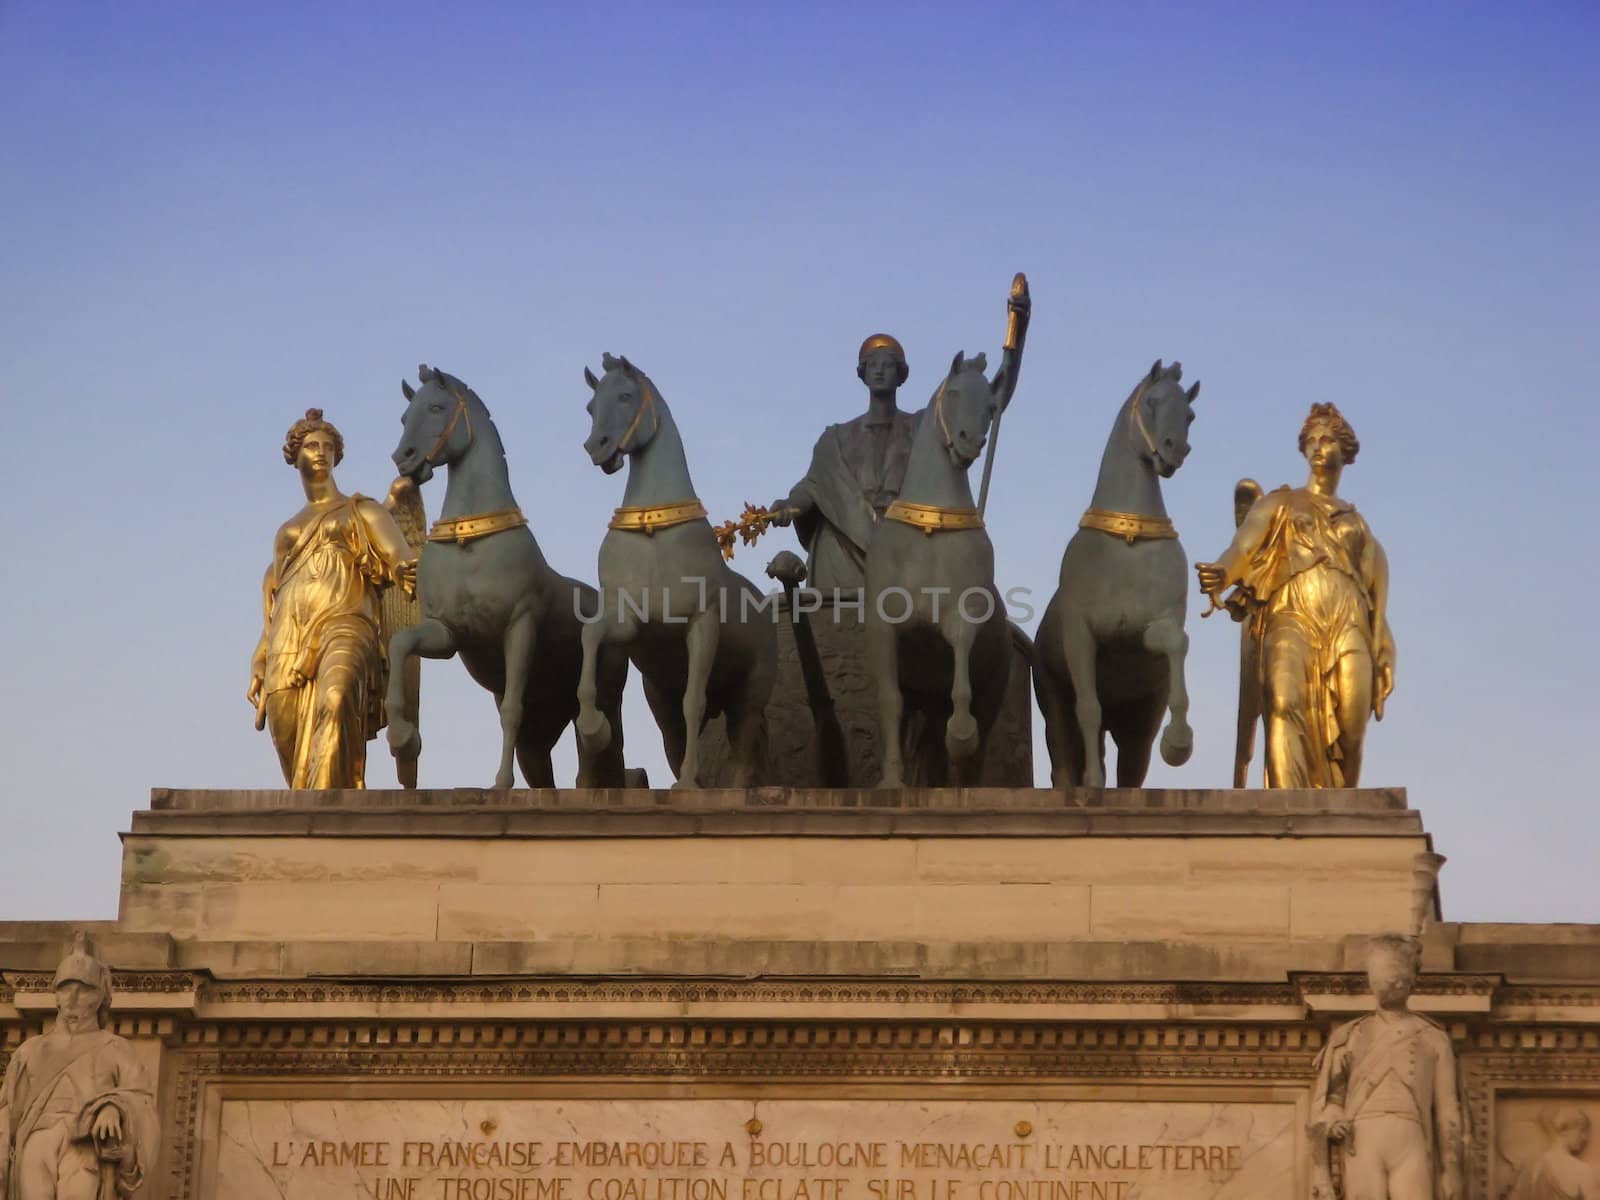 Statues group on the top of the triump arch of the Louvre Carousel in Paris